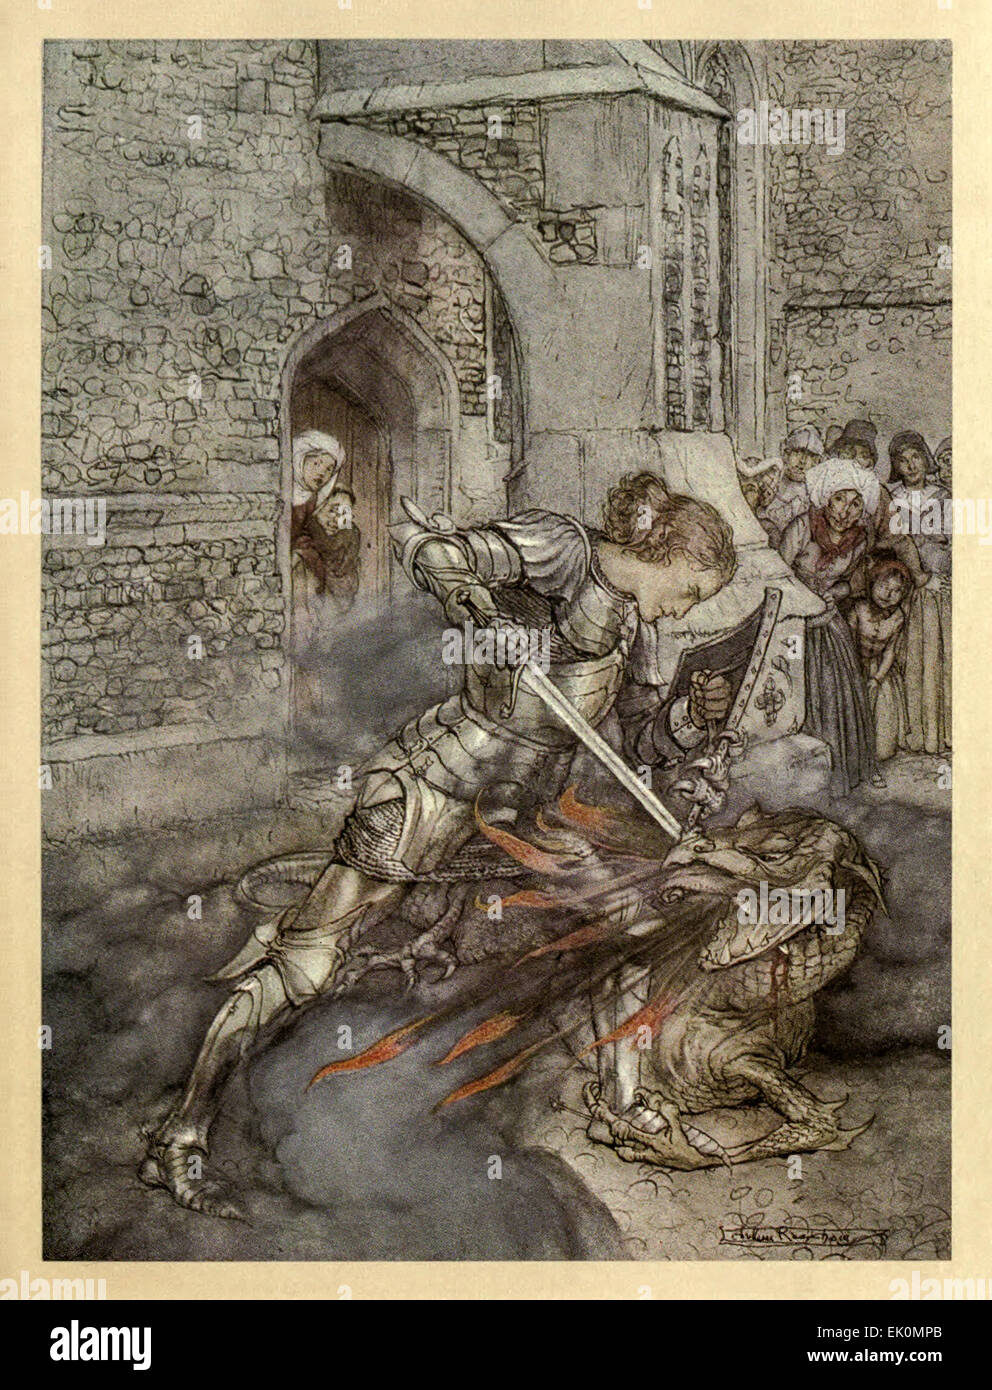 'How Sir Lancelot fought with a friendly dragon.' from 'The Romance of King Arthur and his Knights of the Round Table', illustration by Arthur Rackham (1867-1939). See description for more information. Stock Photo